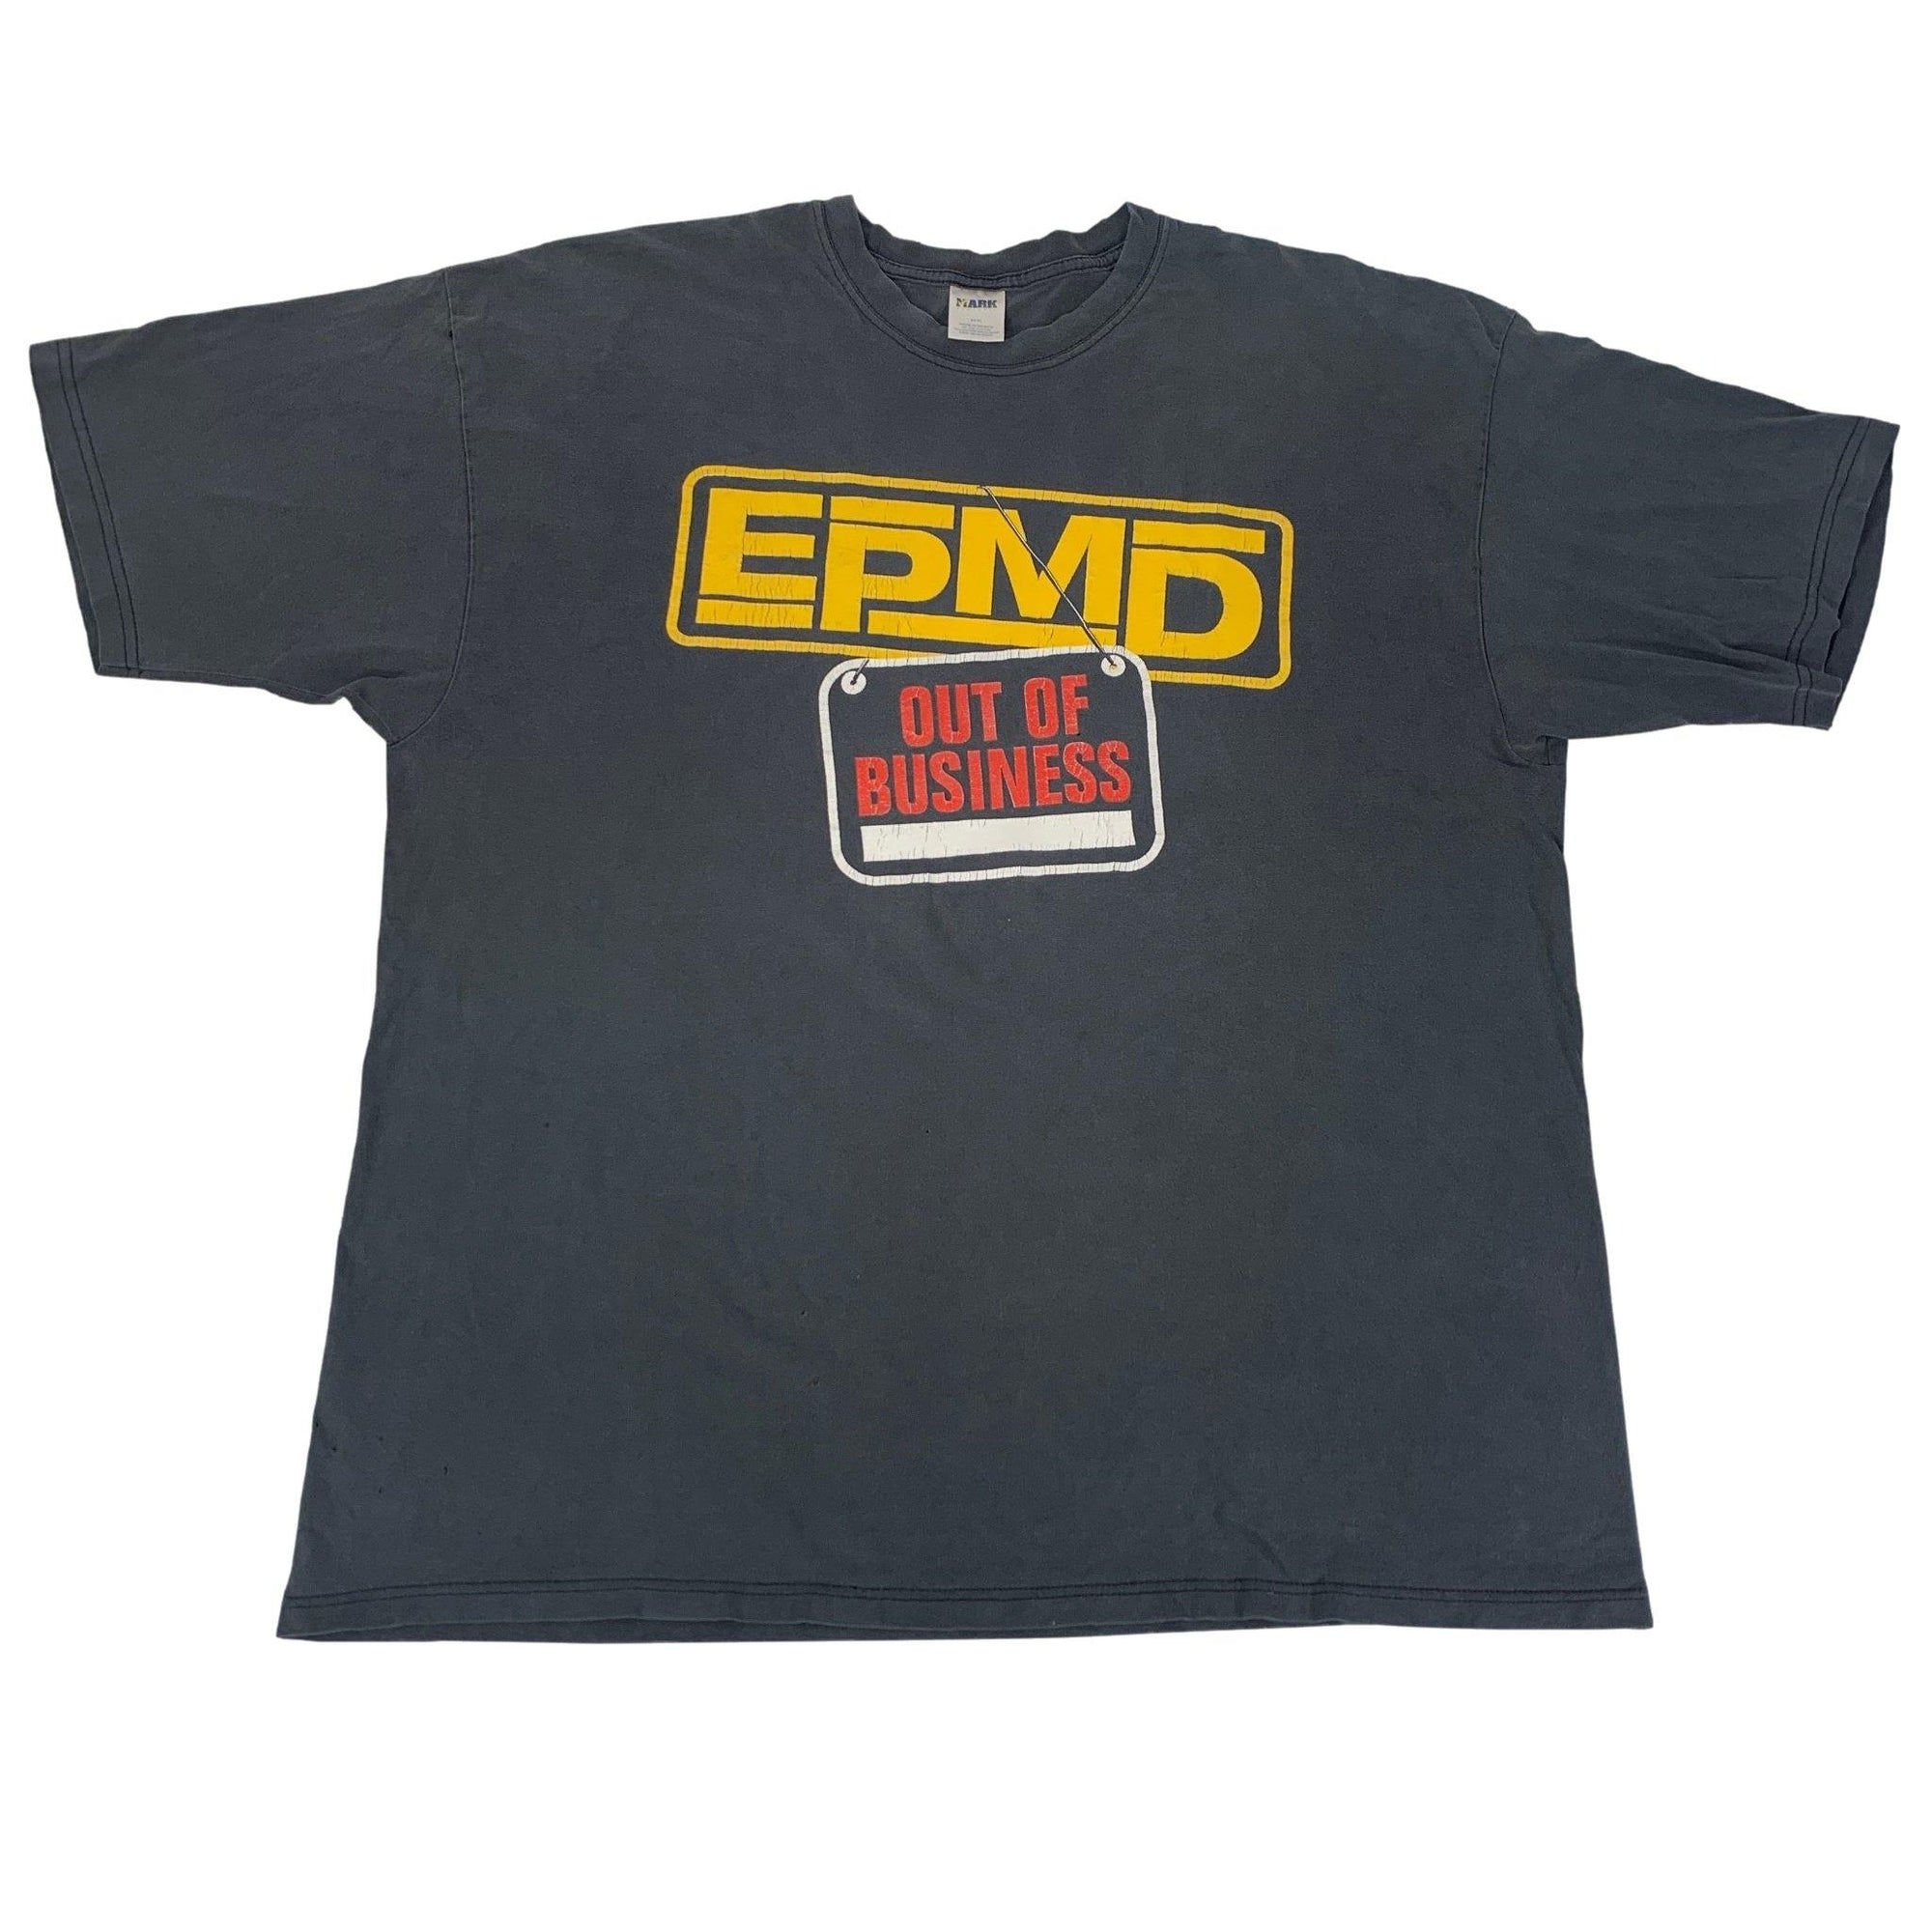 Vintage 1999 EPMD "Out Of Business" Promo T-Shirt - jointcustodydc